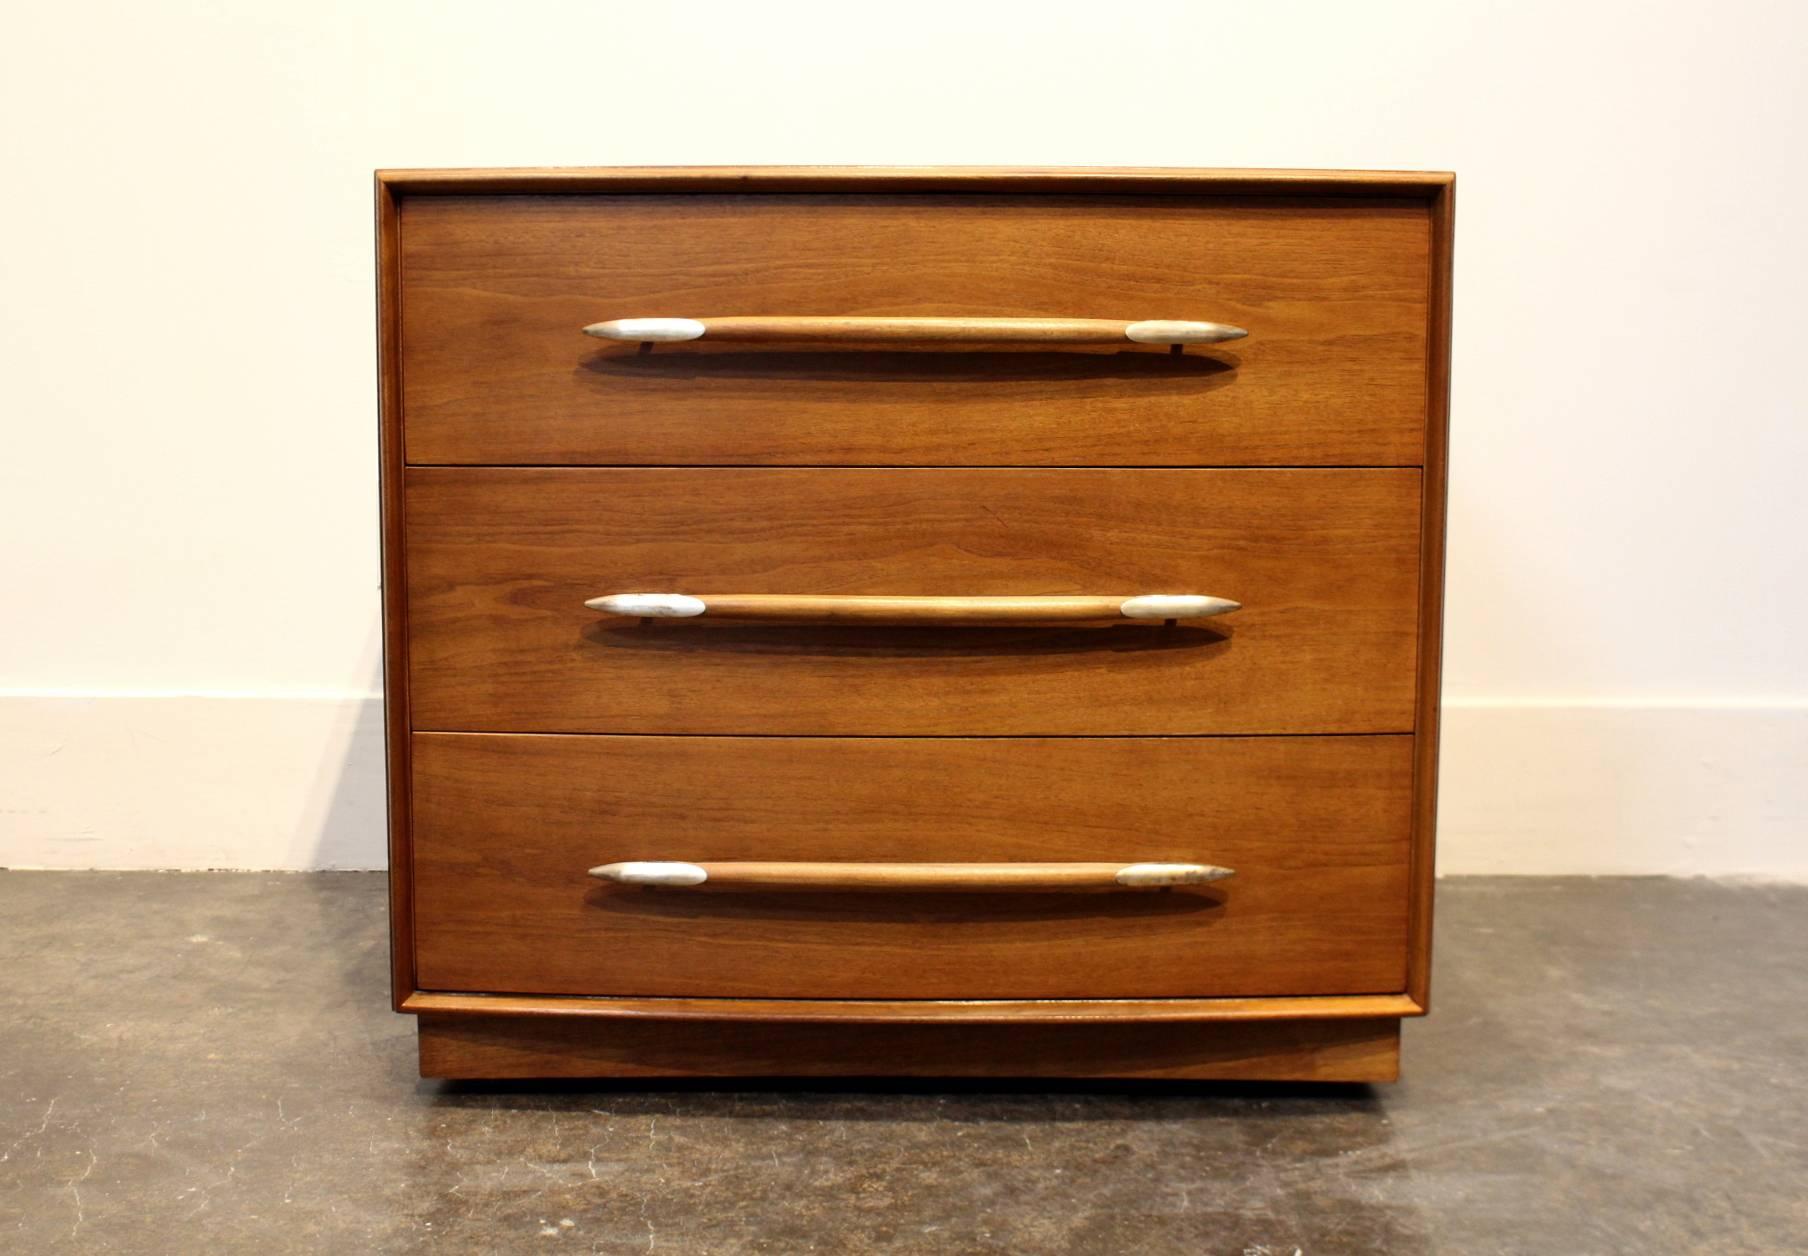 Chest of drawers for Widdicomb, from British architect, interior decorator, and furniture designer; Robsjohn-Gibbings, circa 1950s. Three large drawers with long horizontal pulls capped with brass darts. The whole raised on a plinth base on caster